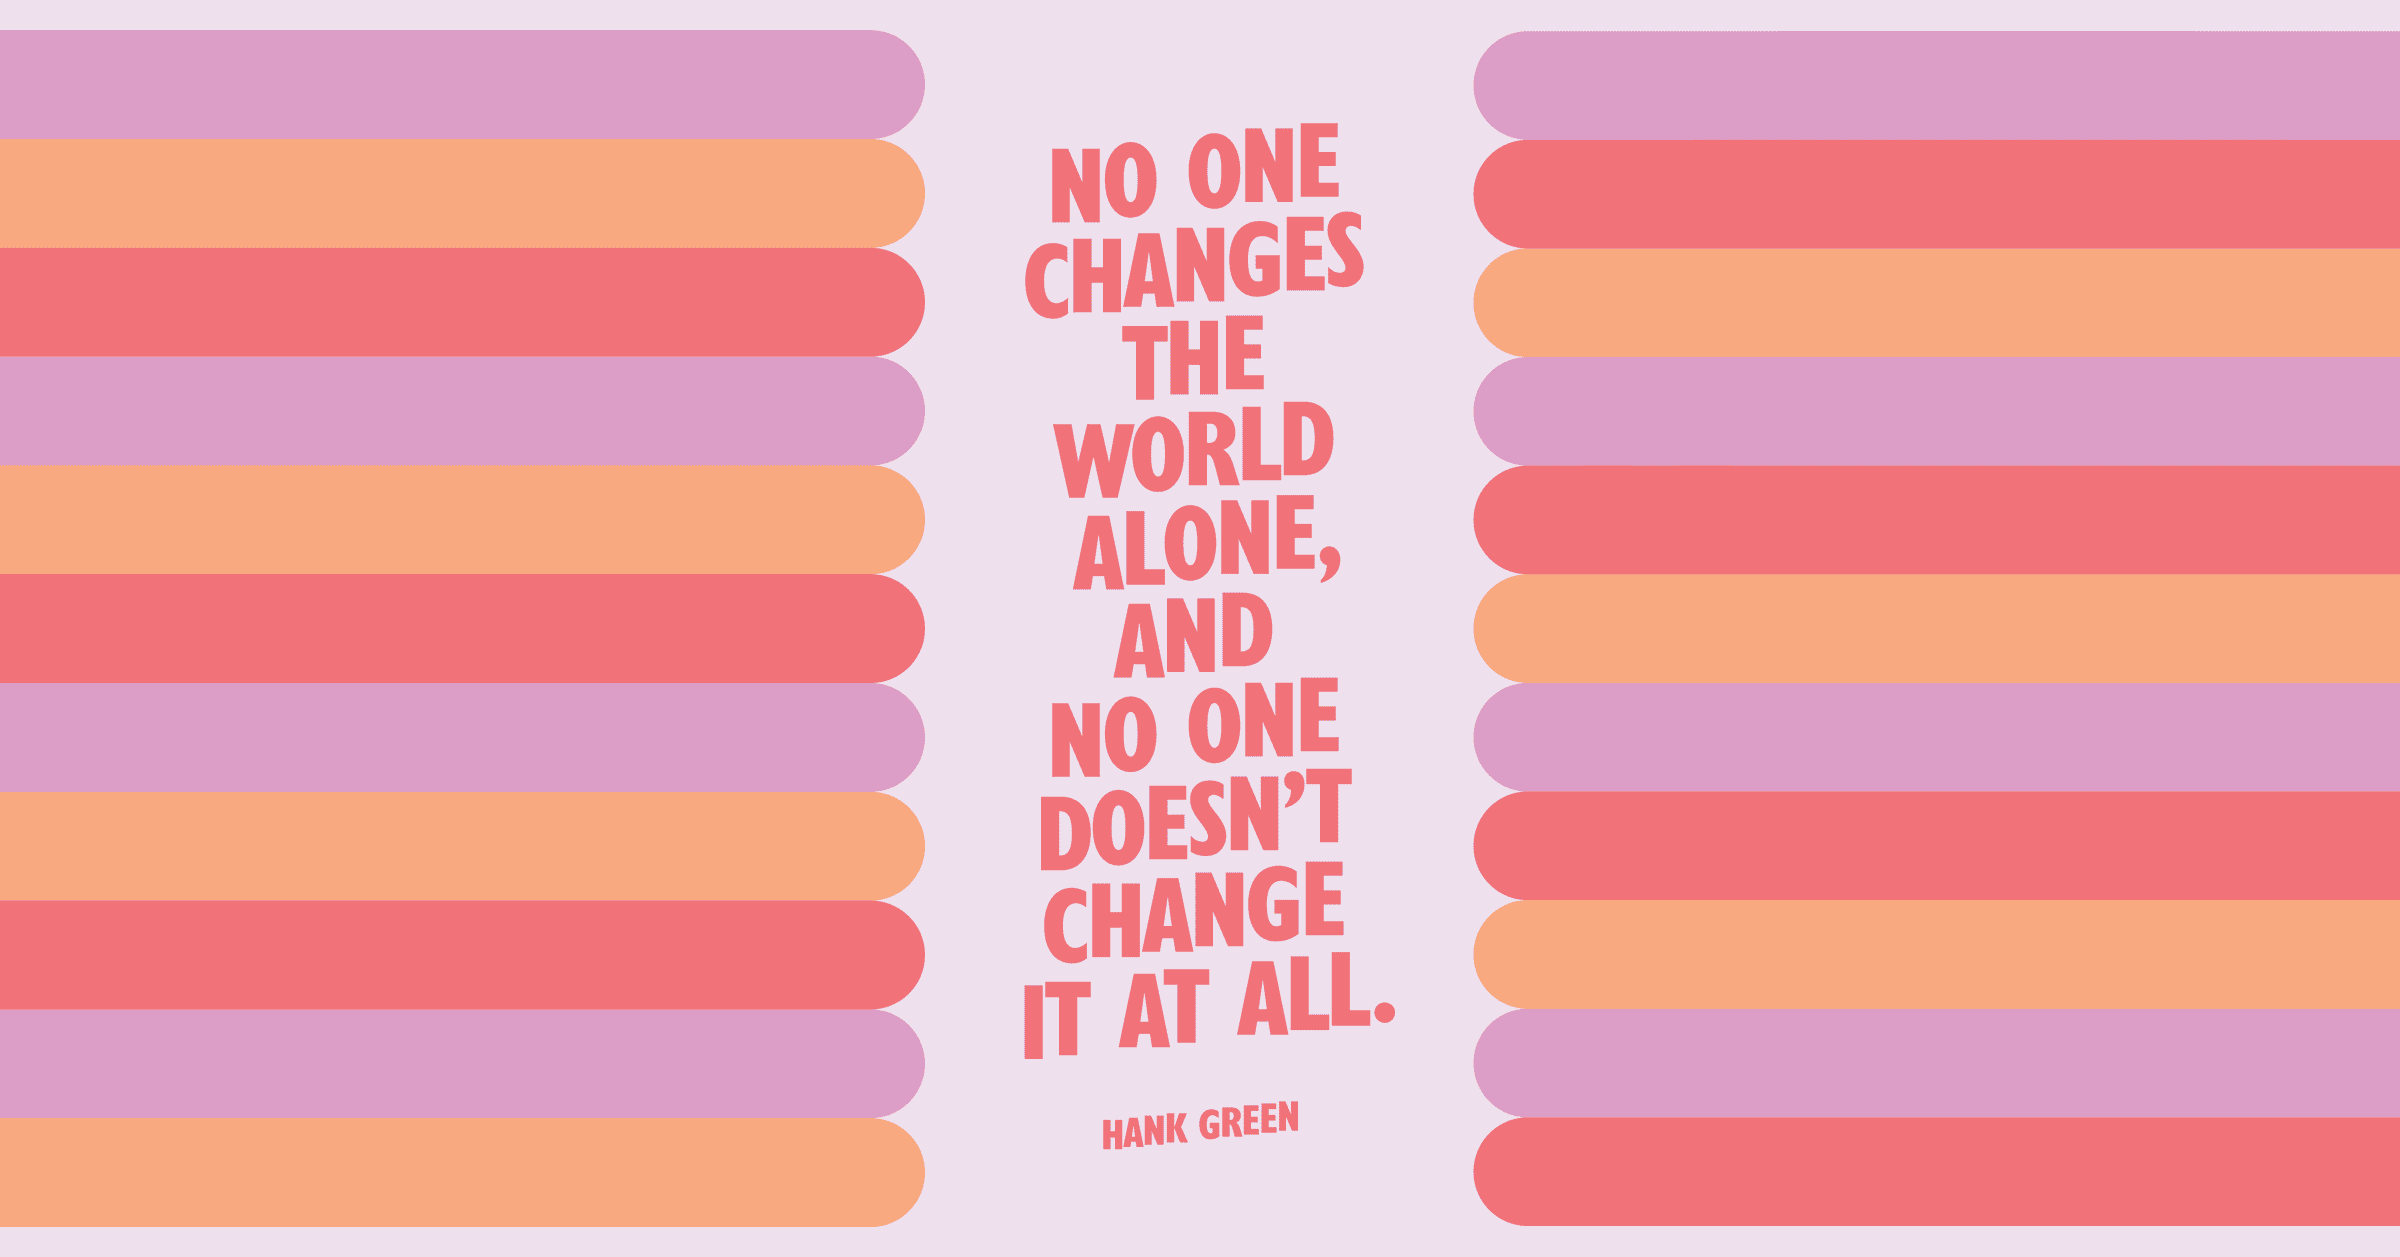 “No one changes the world alone and no one doesn’t change it at all. We are all exceptional, and none of us are.” — Hank Green